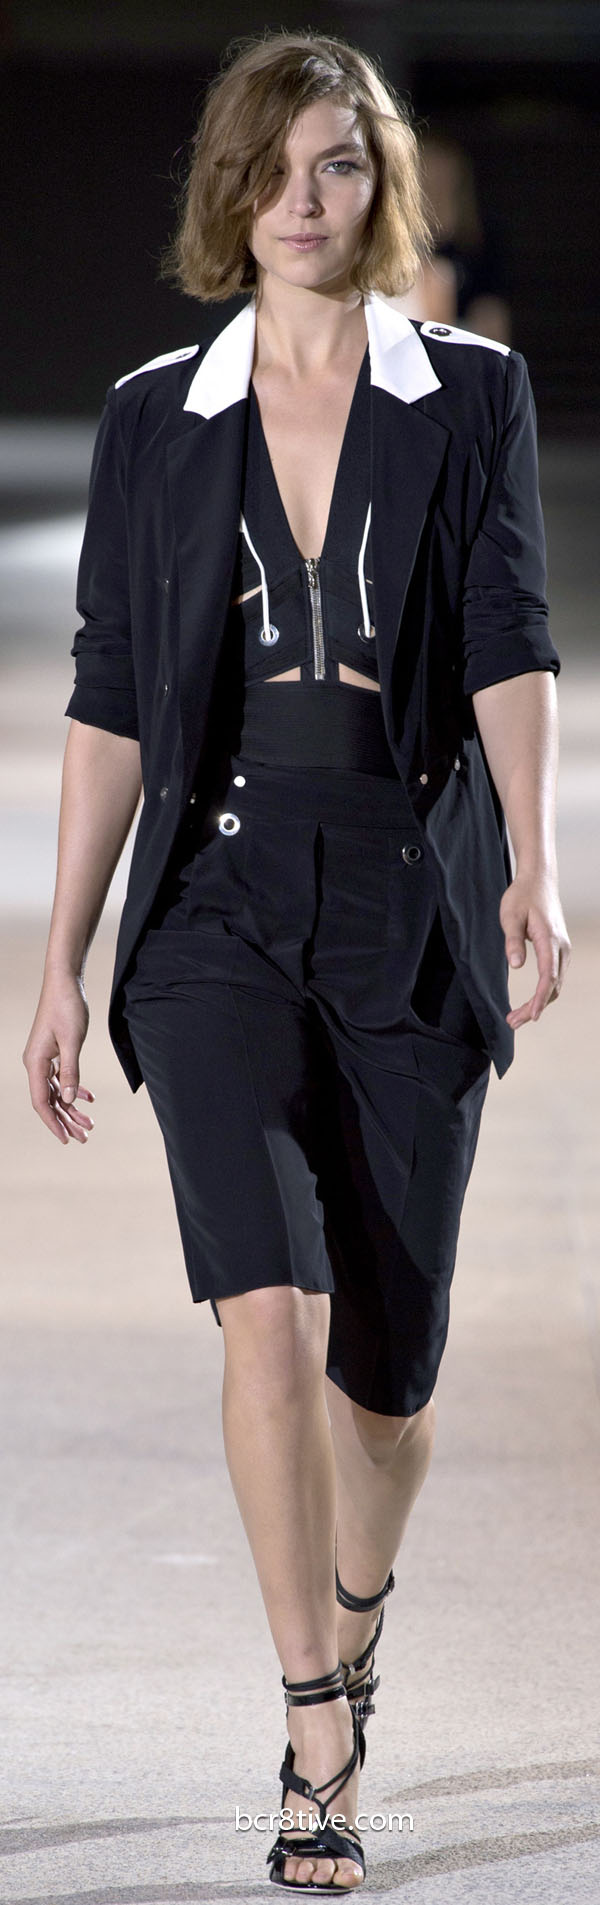 Anthony Vaccarello - Spring 2013 Ready To Wear